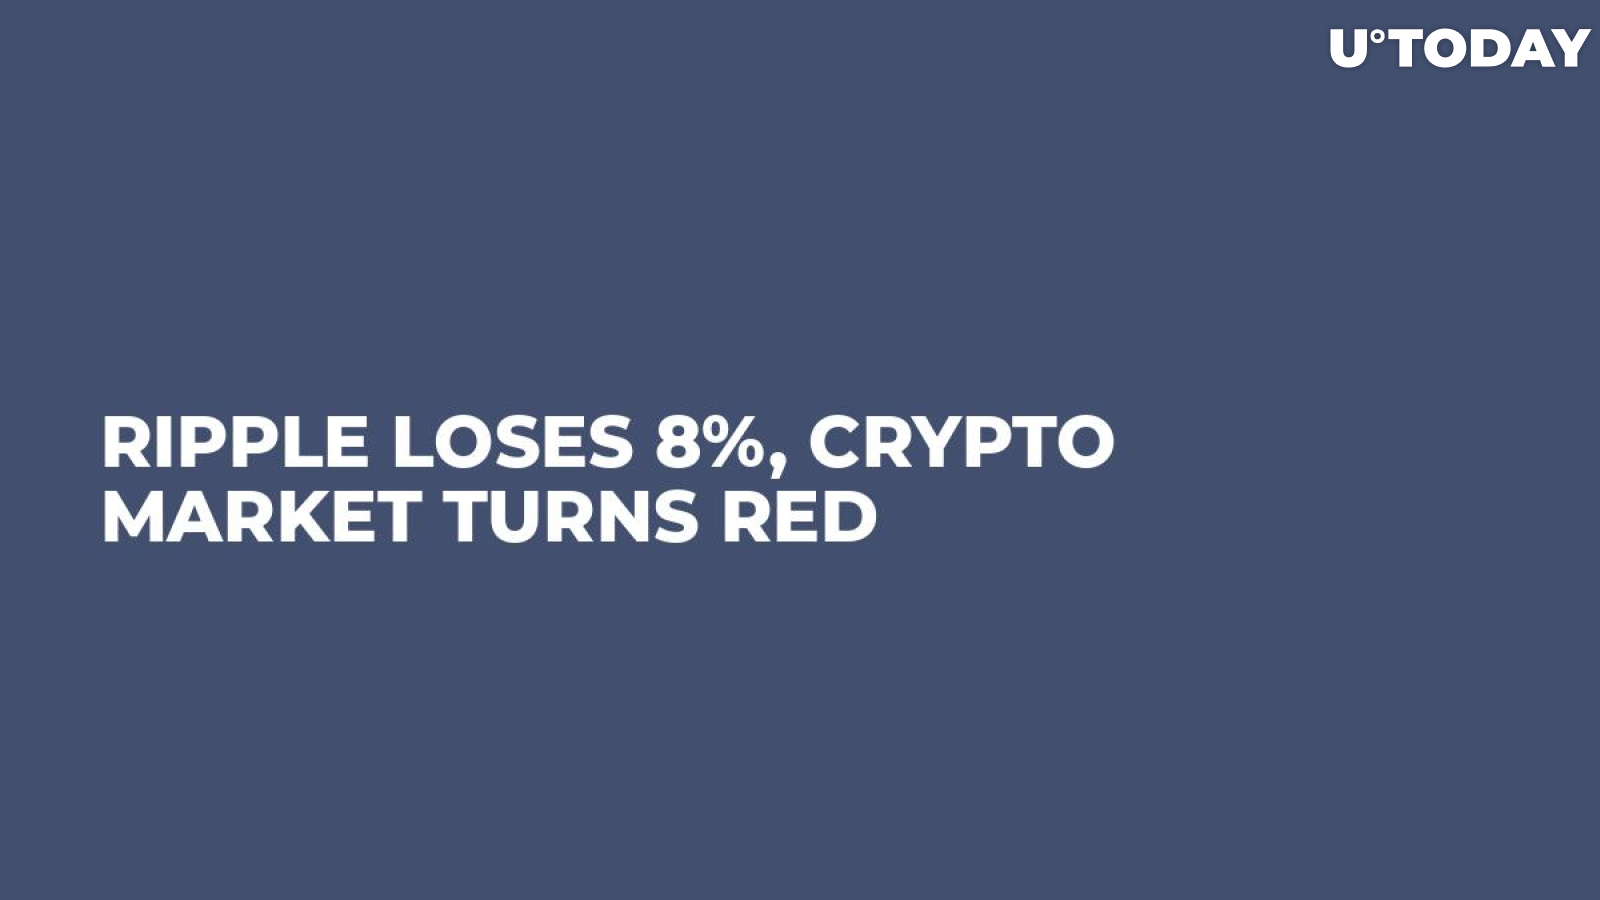 Ripple Loses 8%, Crypto Market Turns Red